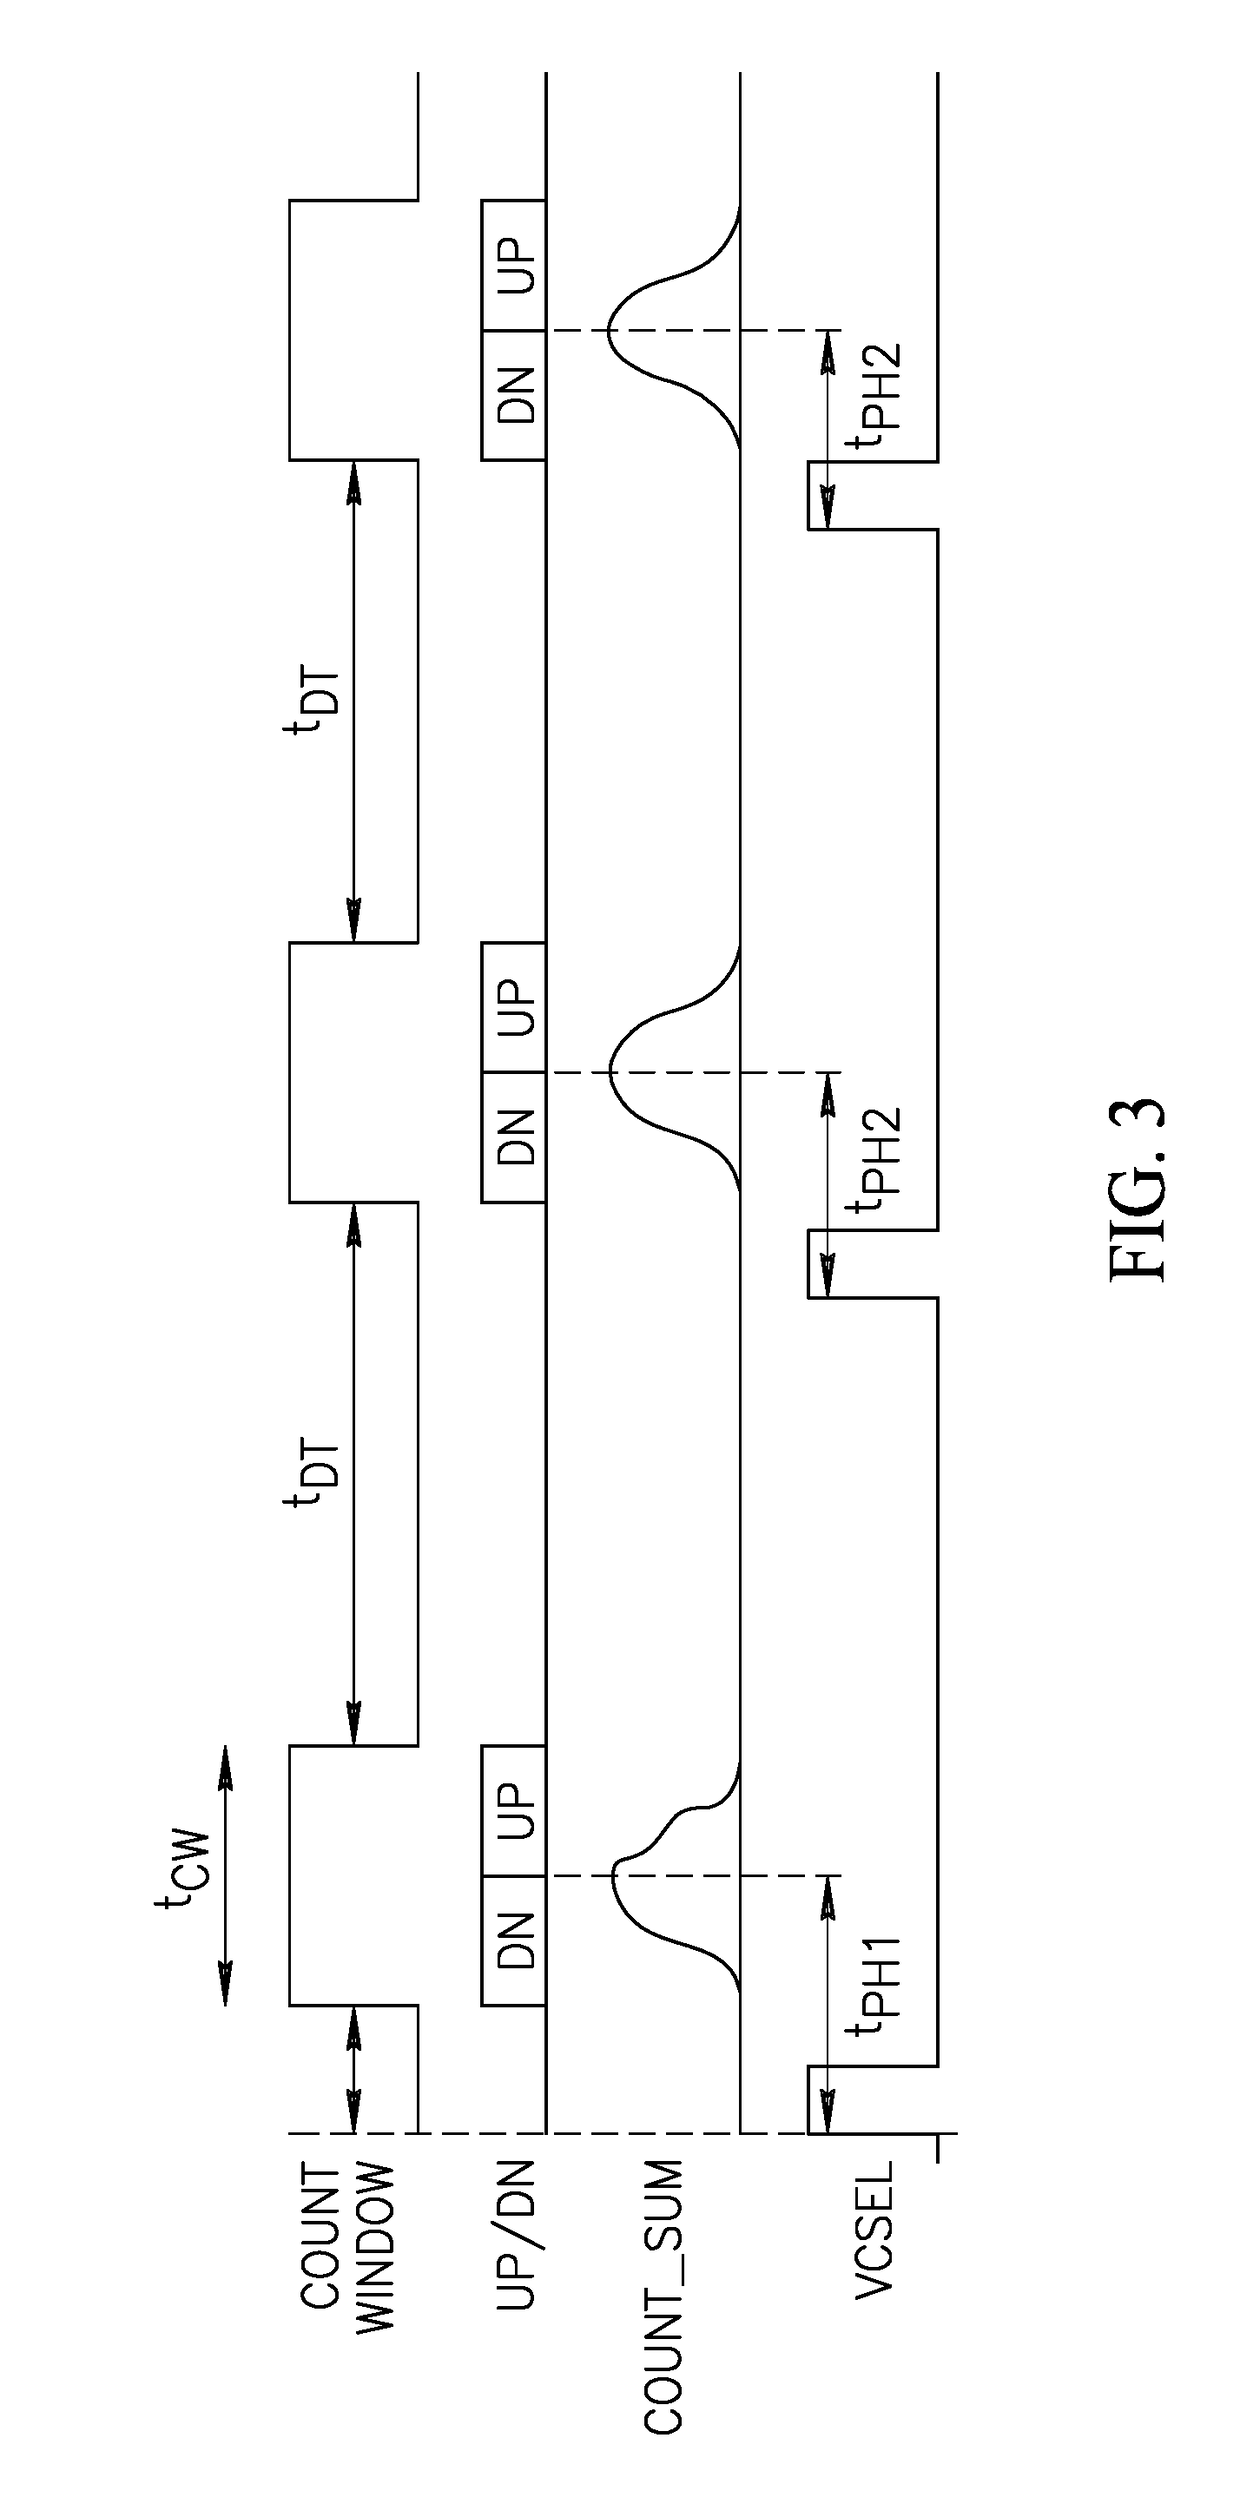 Ranging device with imaging capability